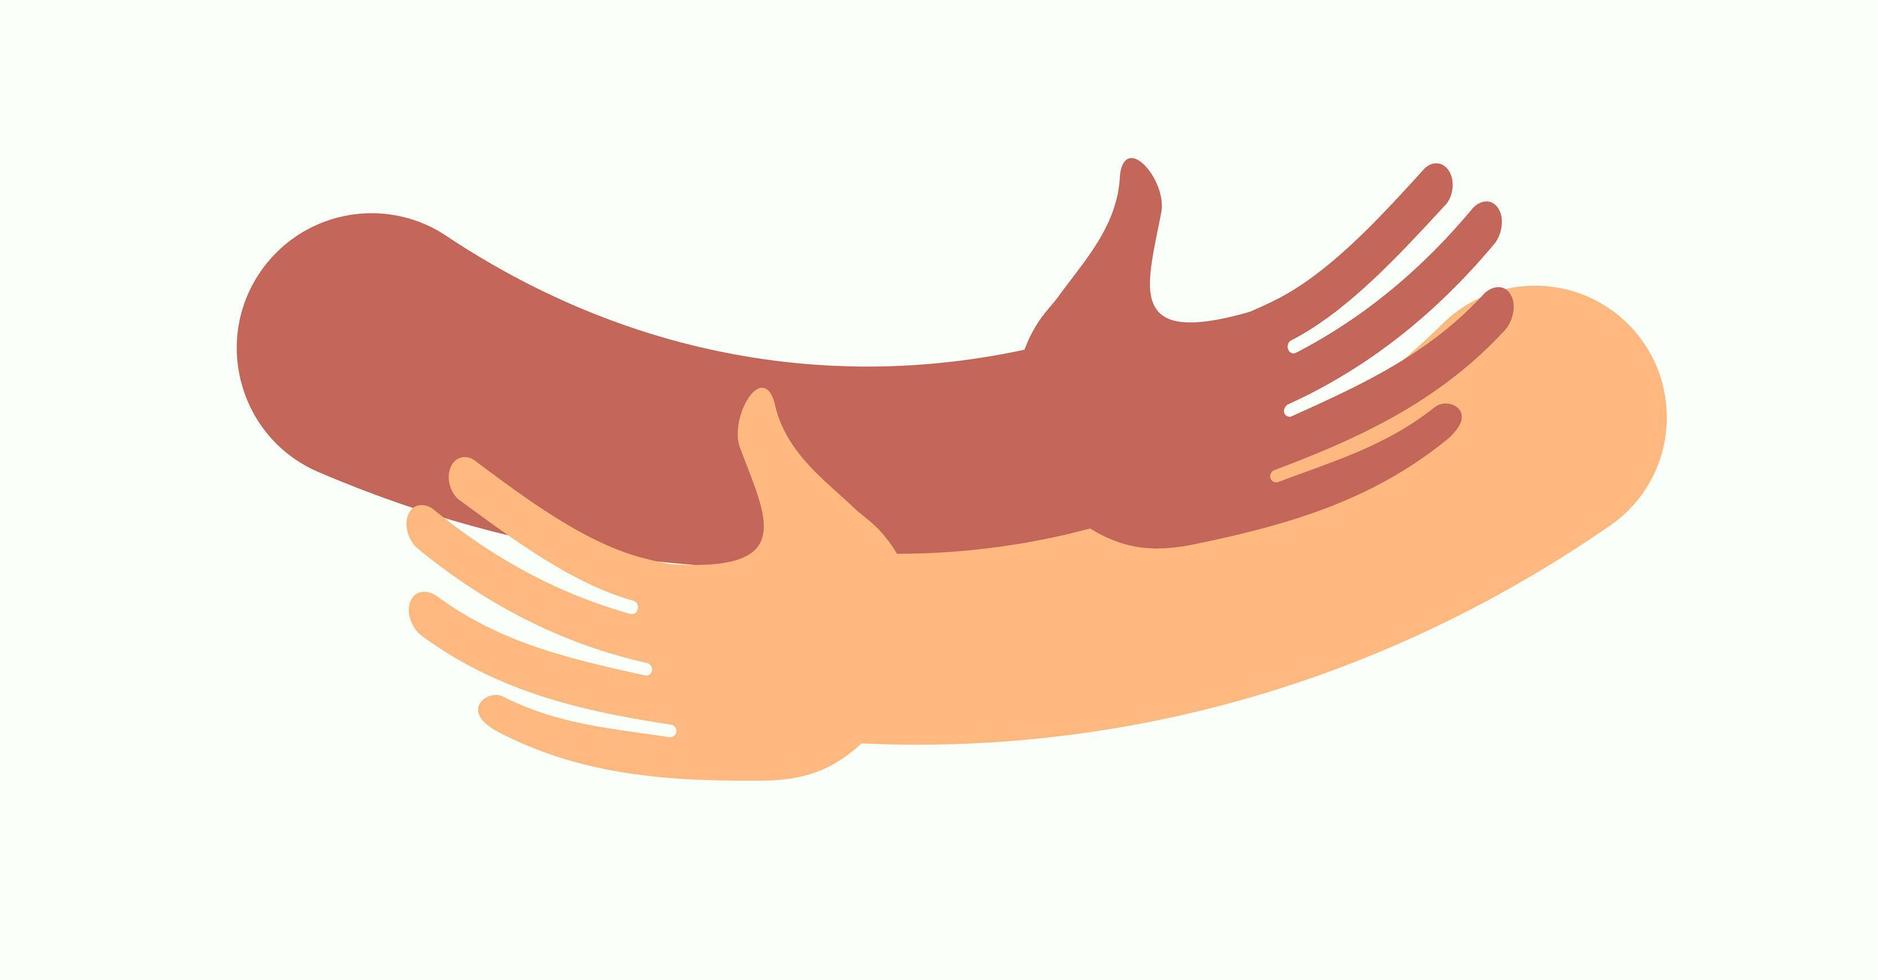 Human hugs hugging hands support and love symbol hugged arms girth silhouette unity and warmth feeling, flat vector illustration